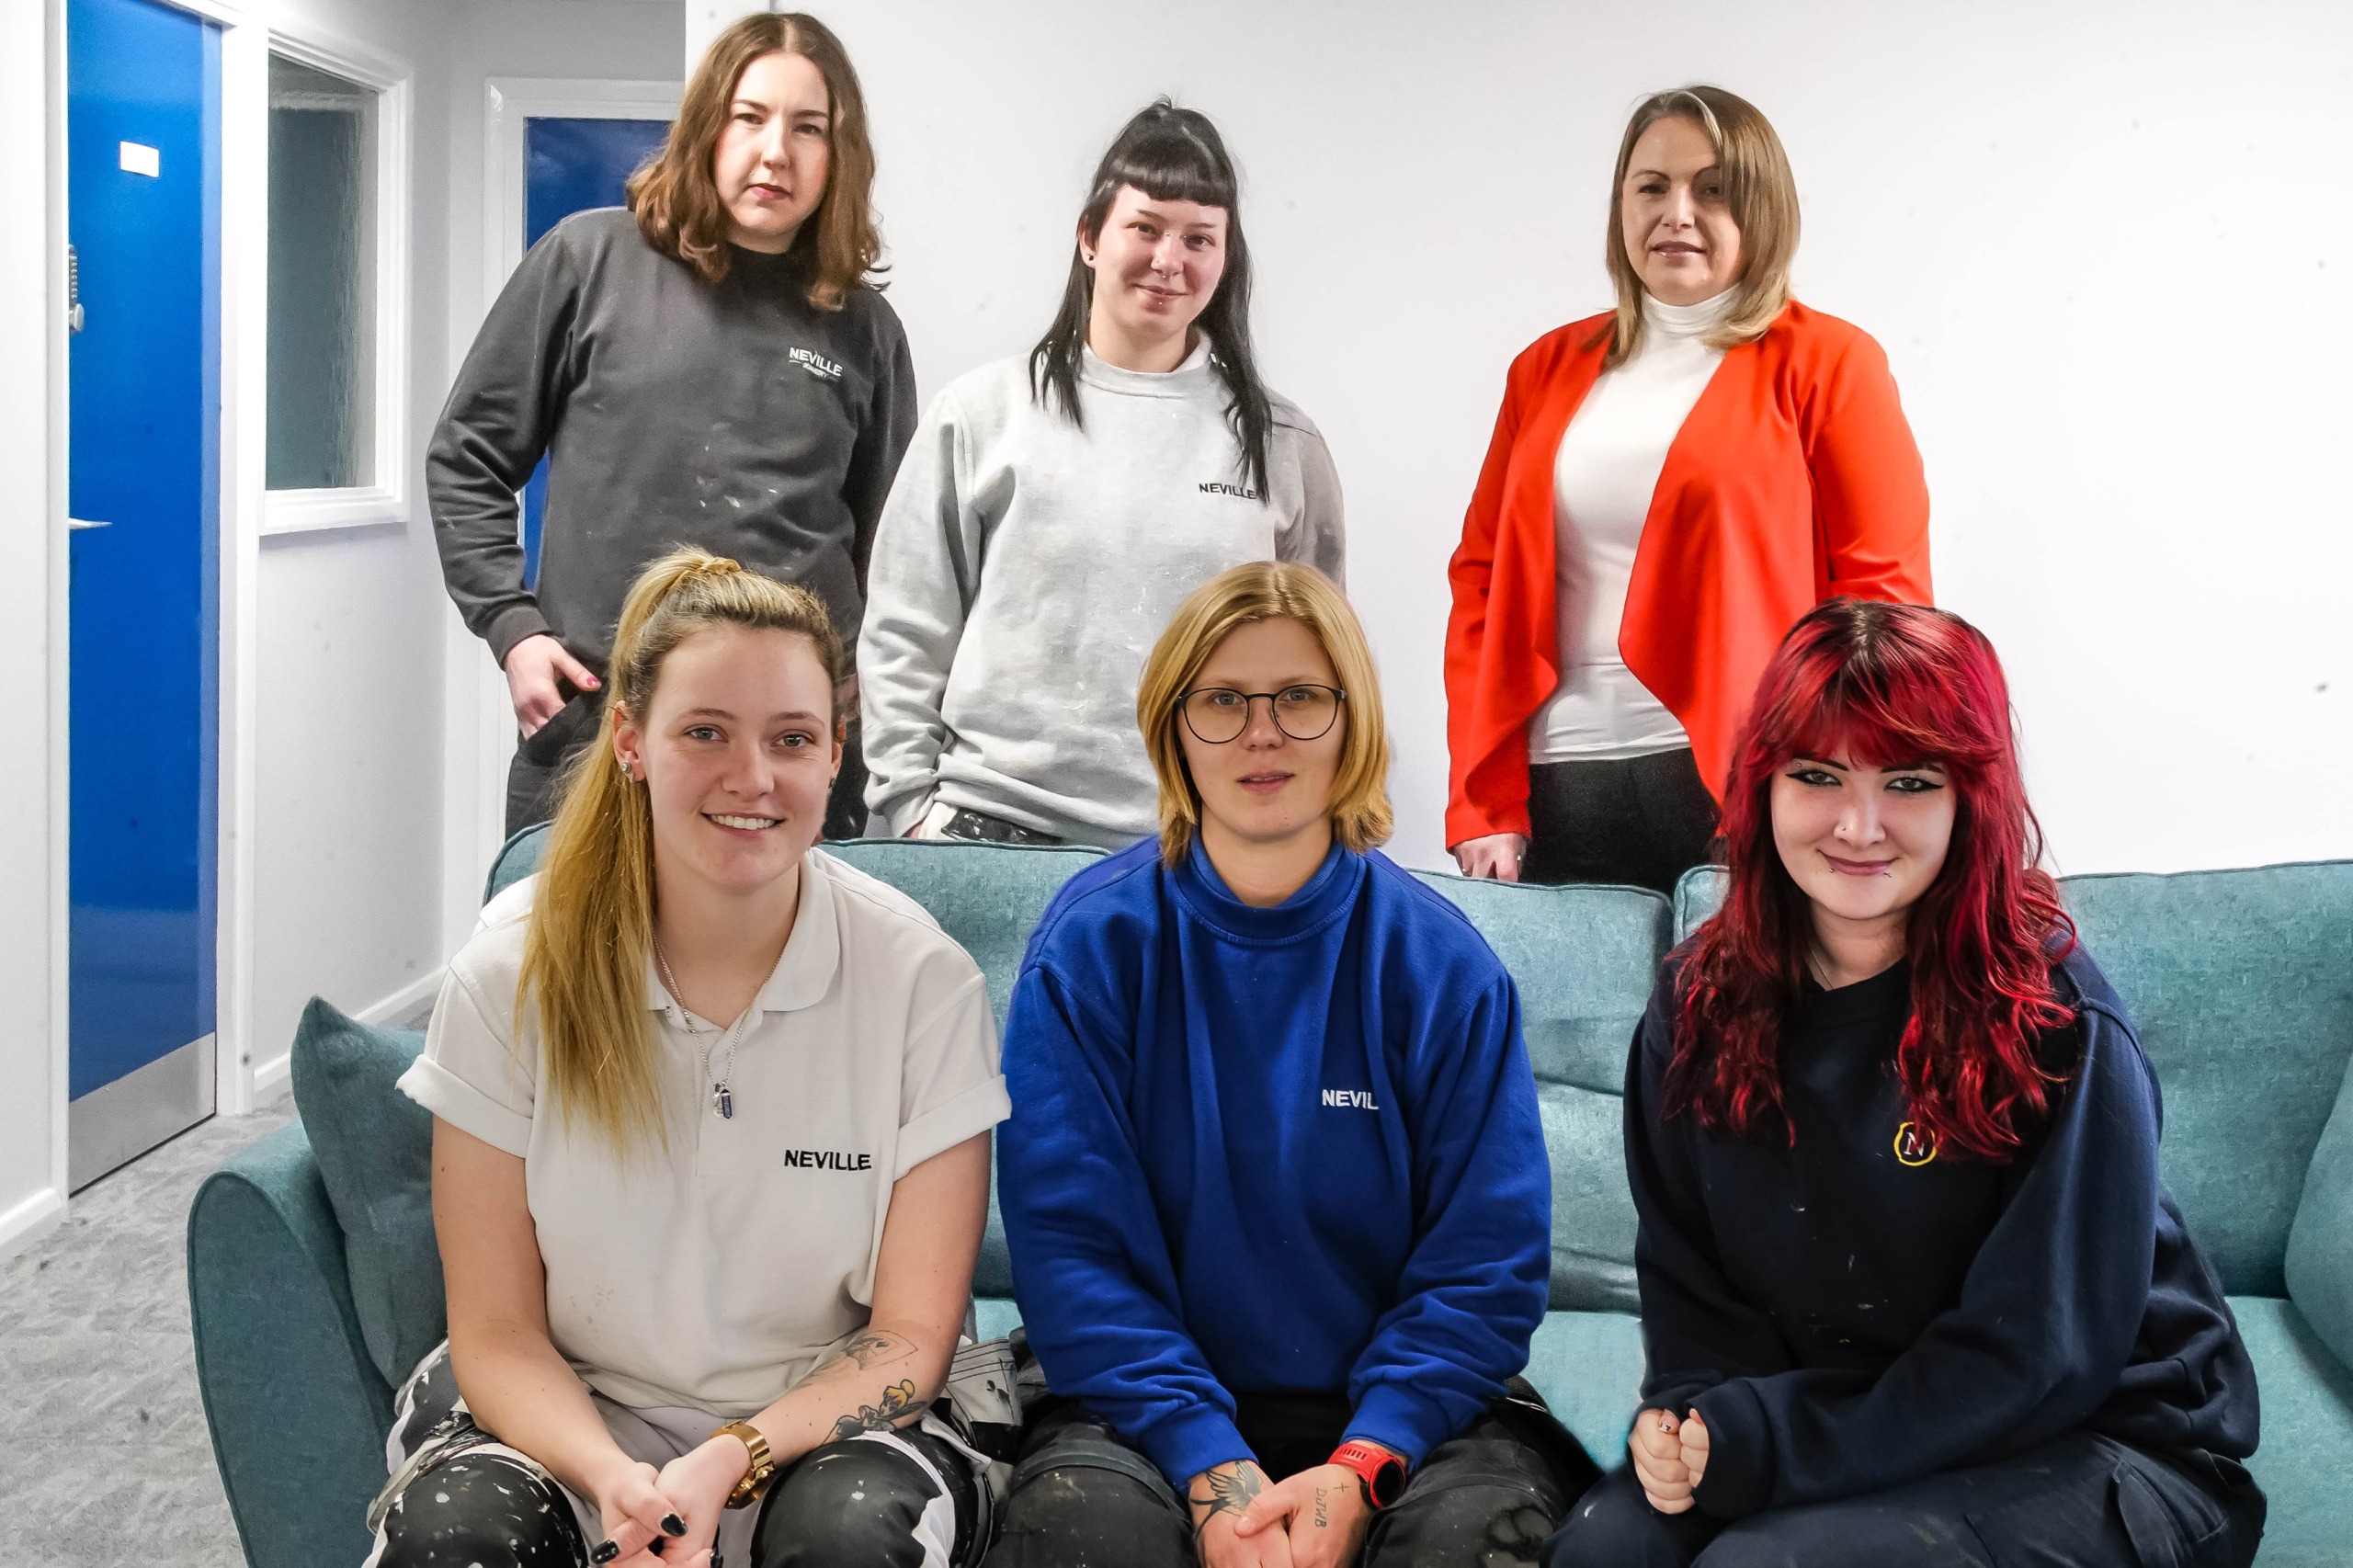 Local Family Firm Builds Support for Women in Construction Week | Northamptonshire Chamber of Commerce